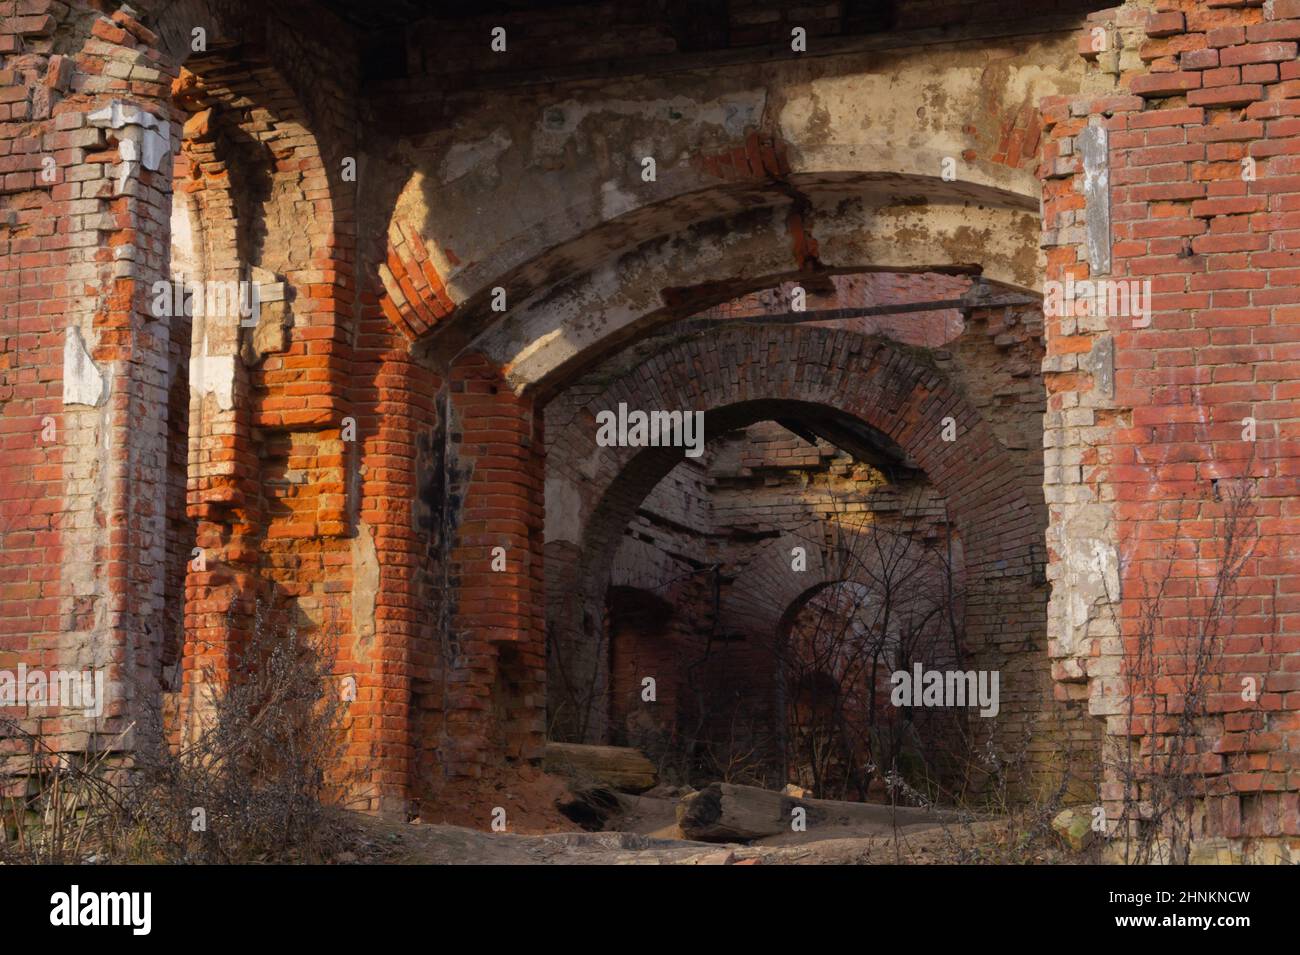 Old ruins. destroyed red brick walls of ancient building Stock Photo